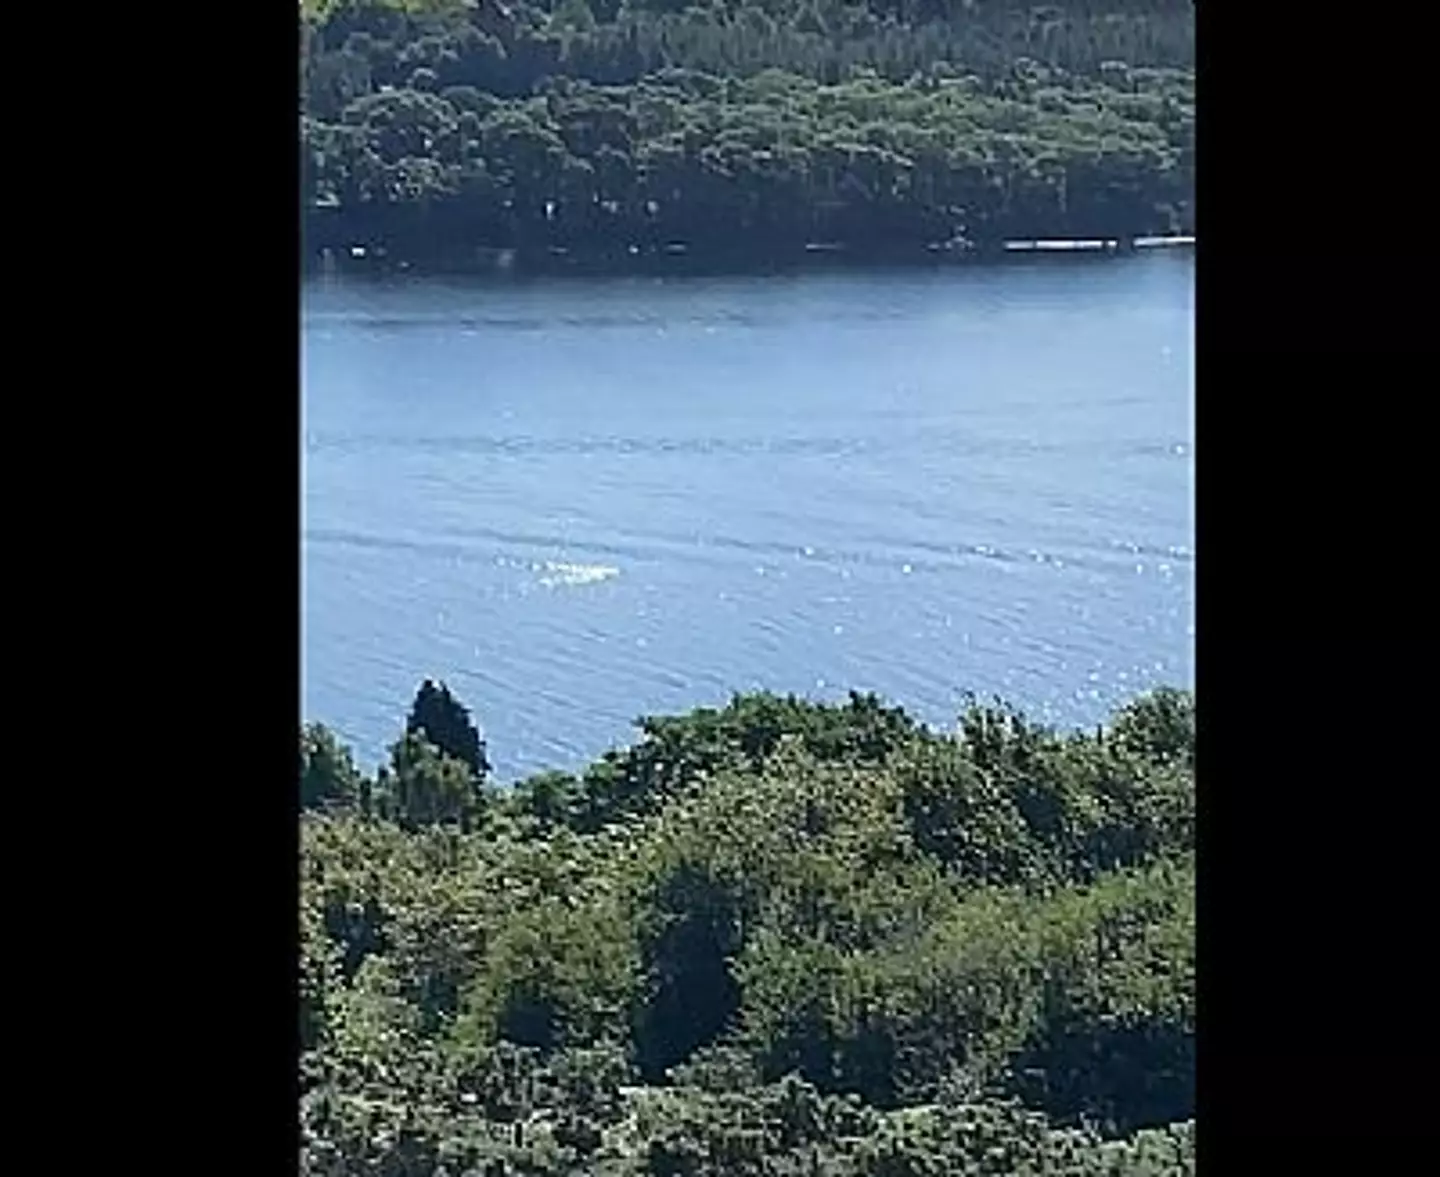 Nessie was supposedly spotted by a local resident.